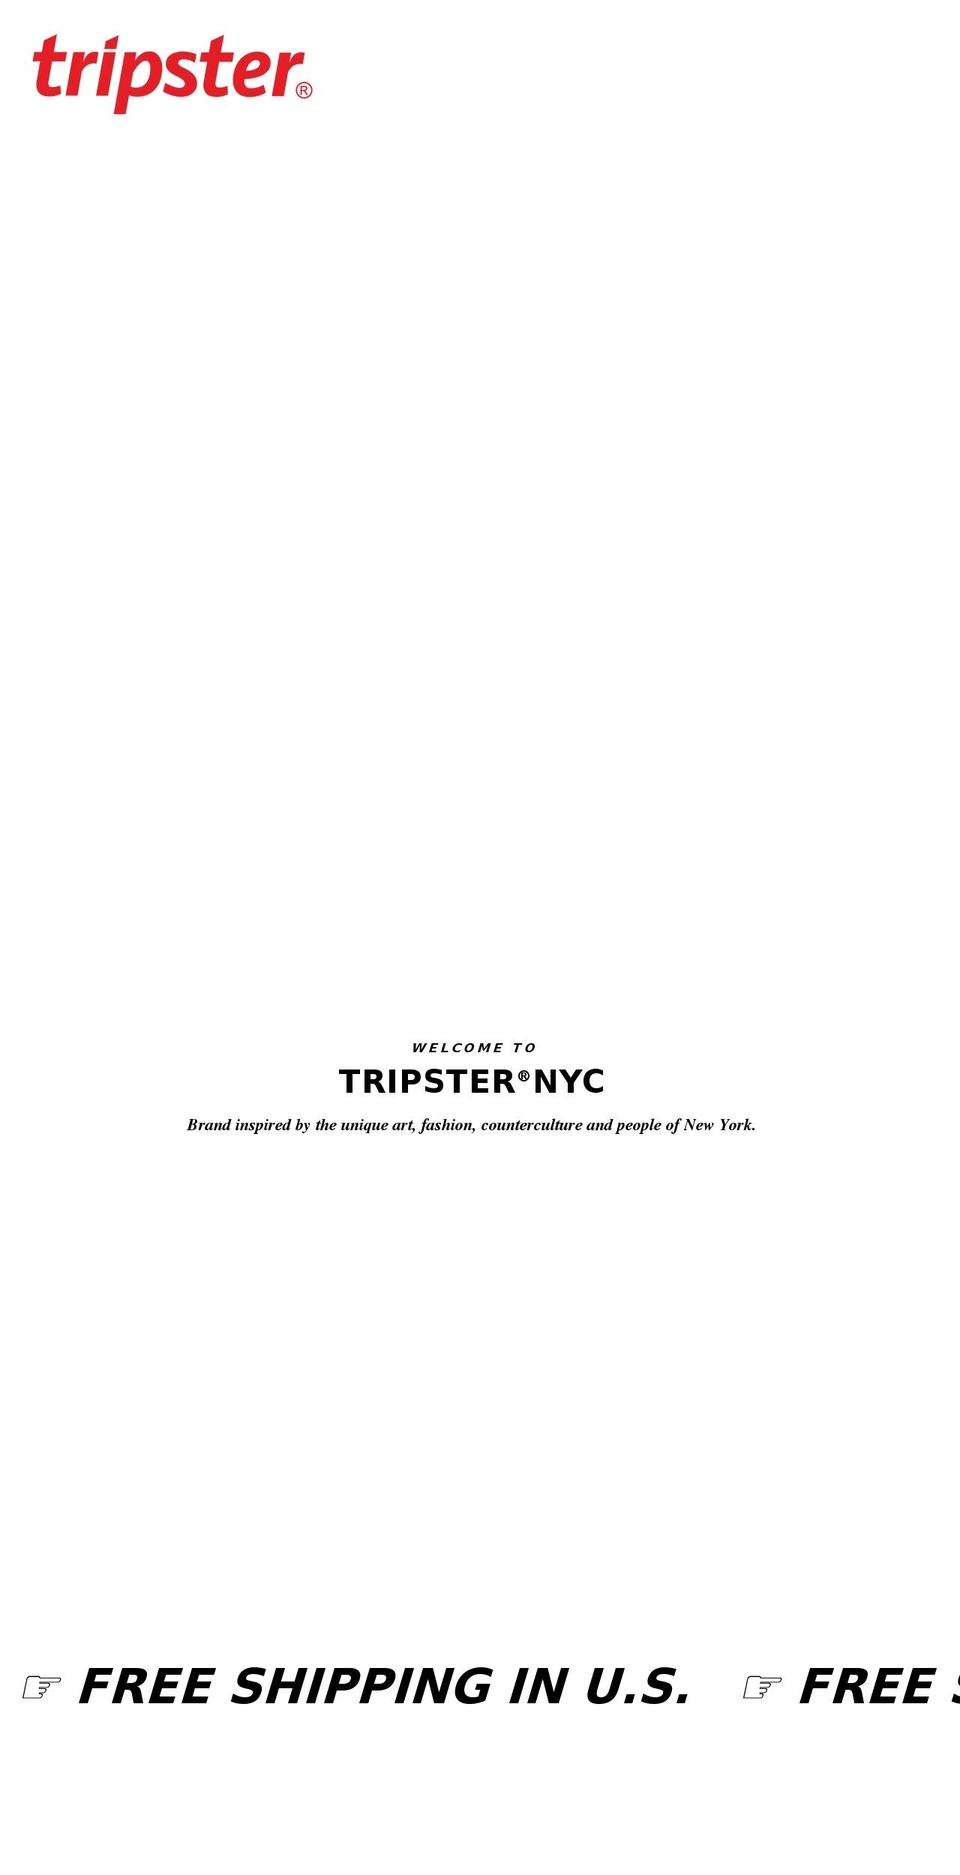 tripster.nyc shopify website screenshot